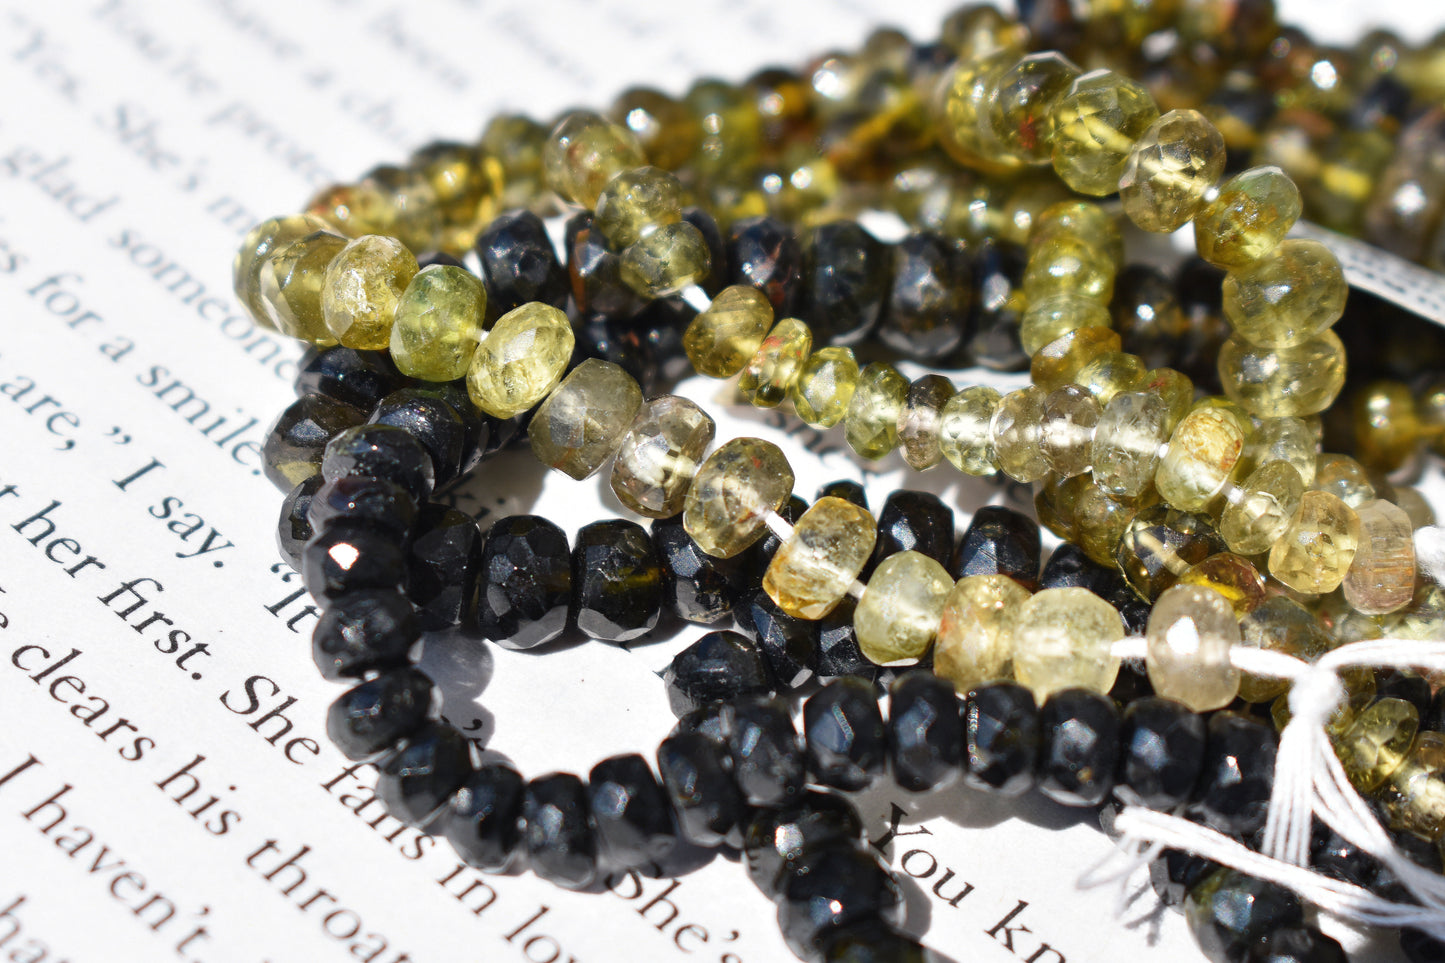 Grey, Black & Green Tourmaline Rondelle Faceted Beads 3-5.5mm